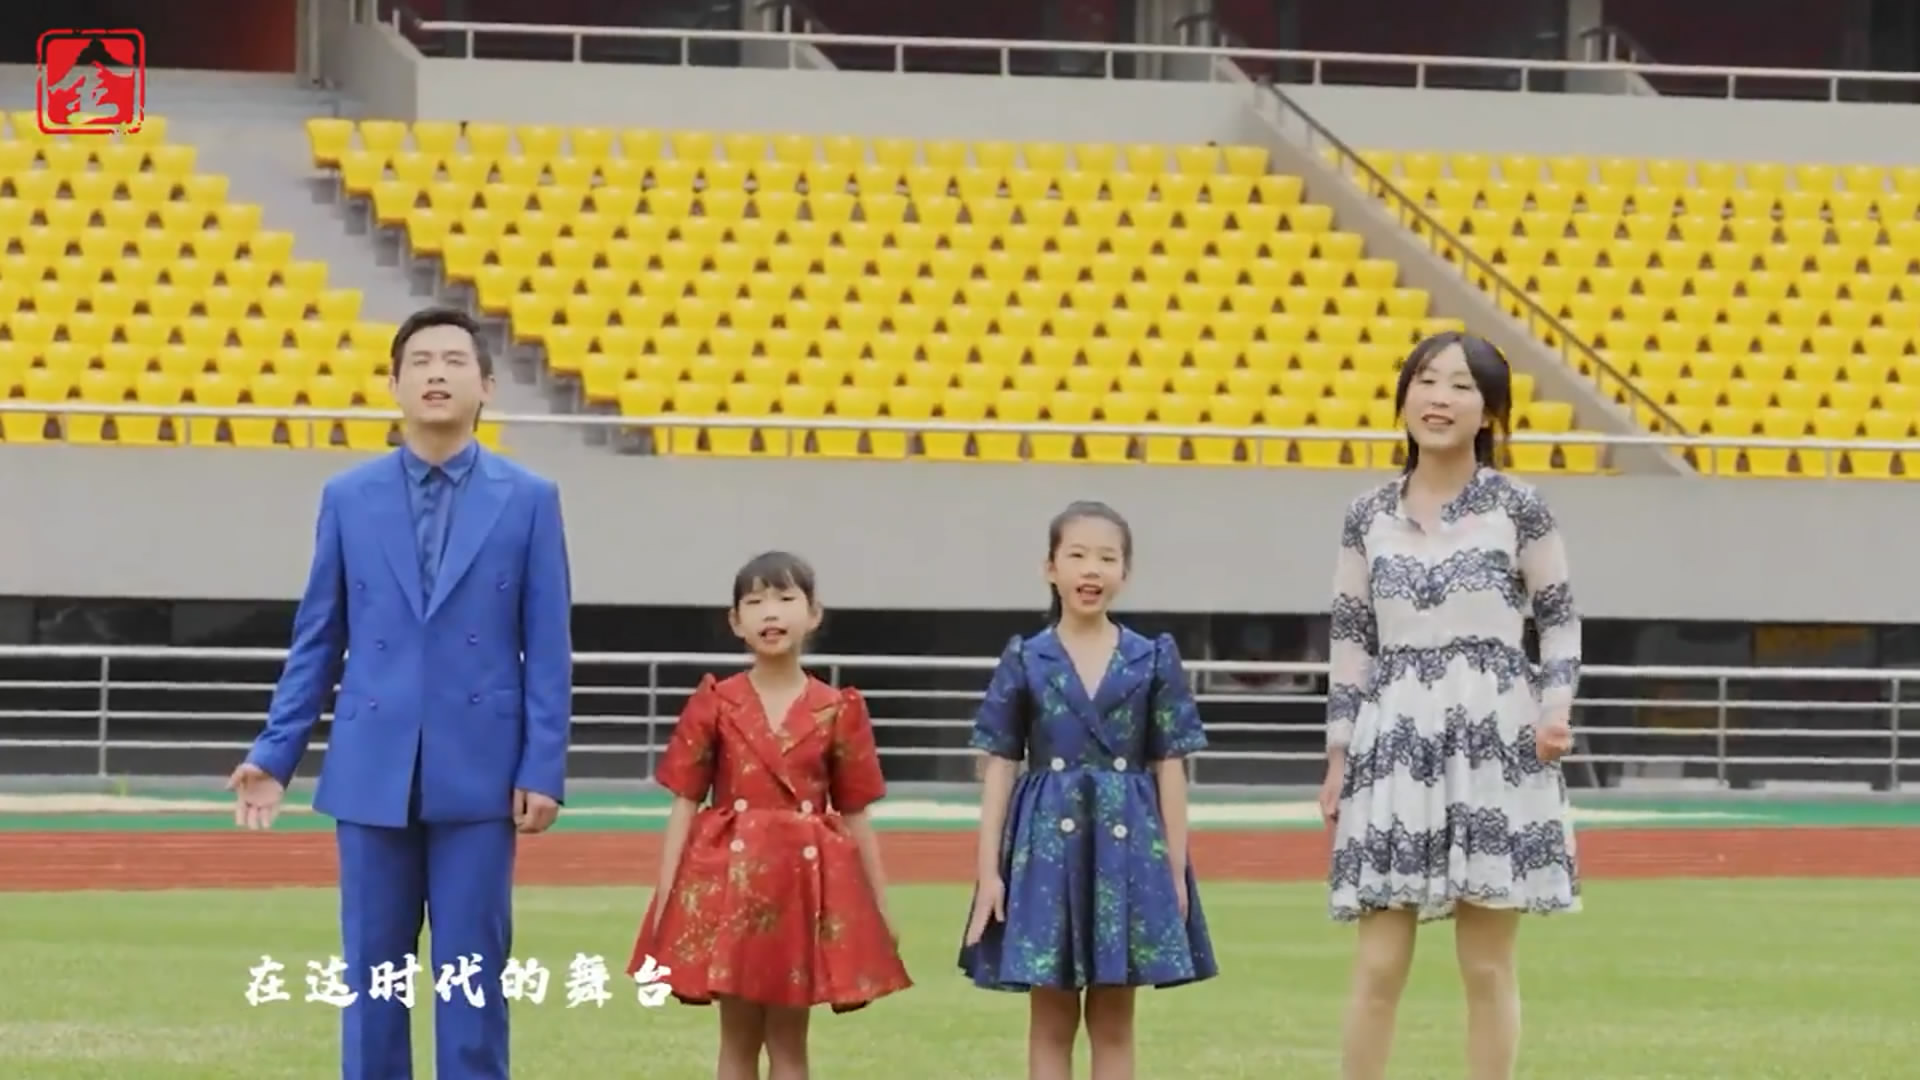 Song commemorates upcoming Asian Games